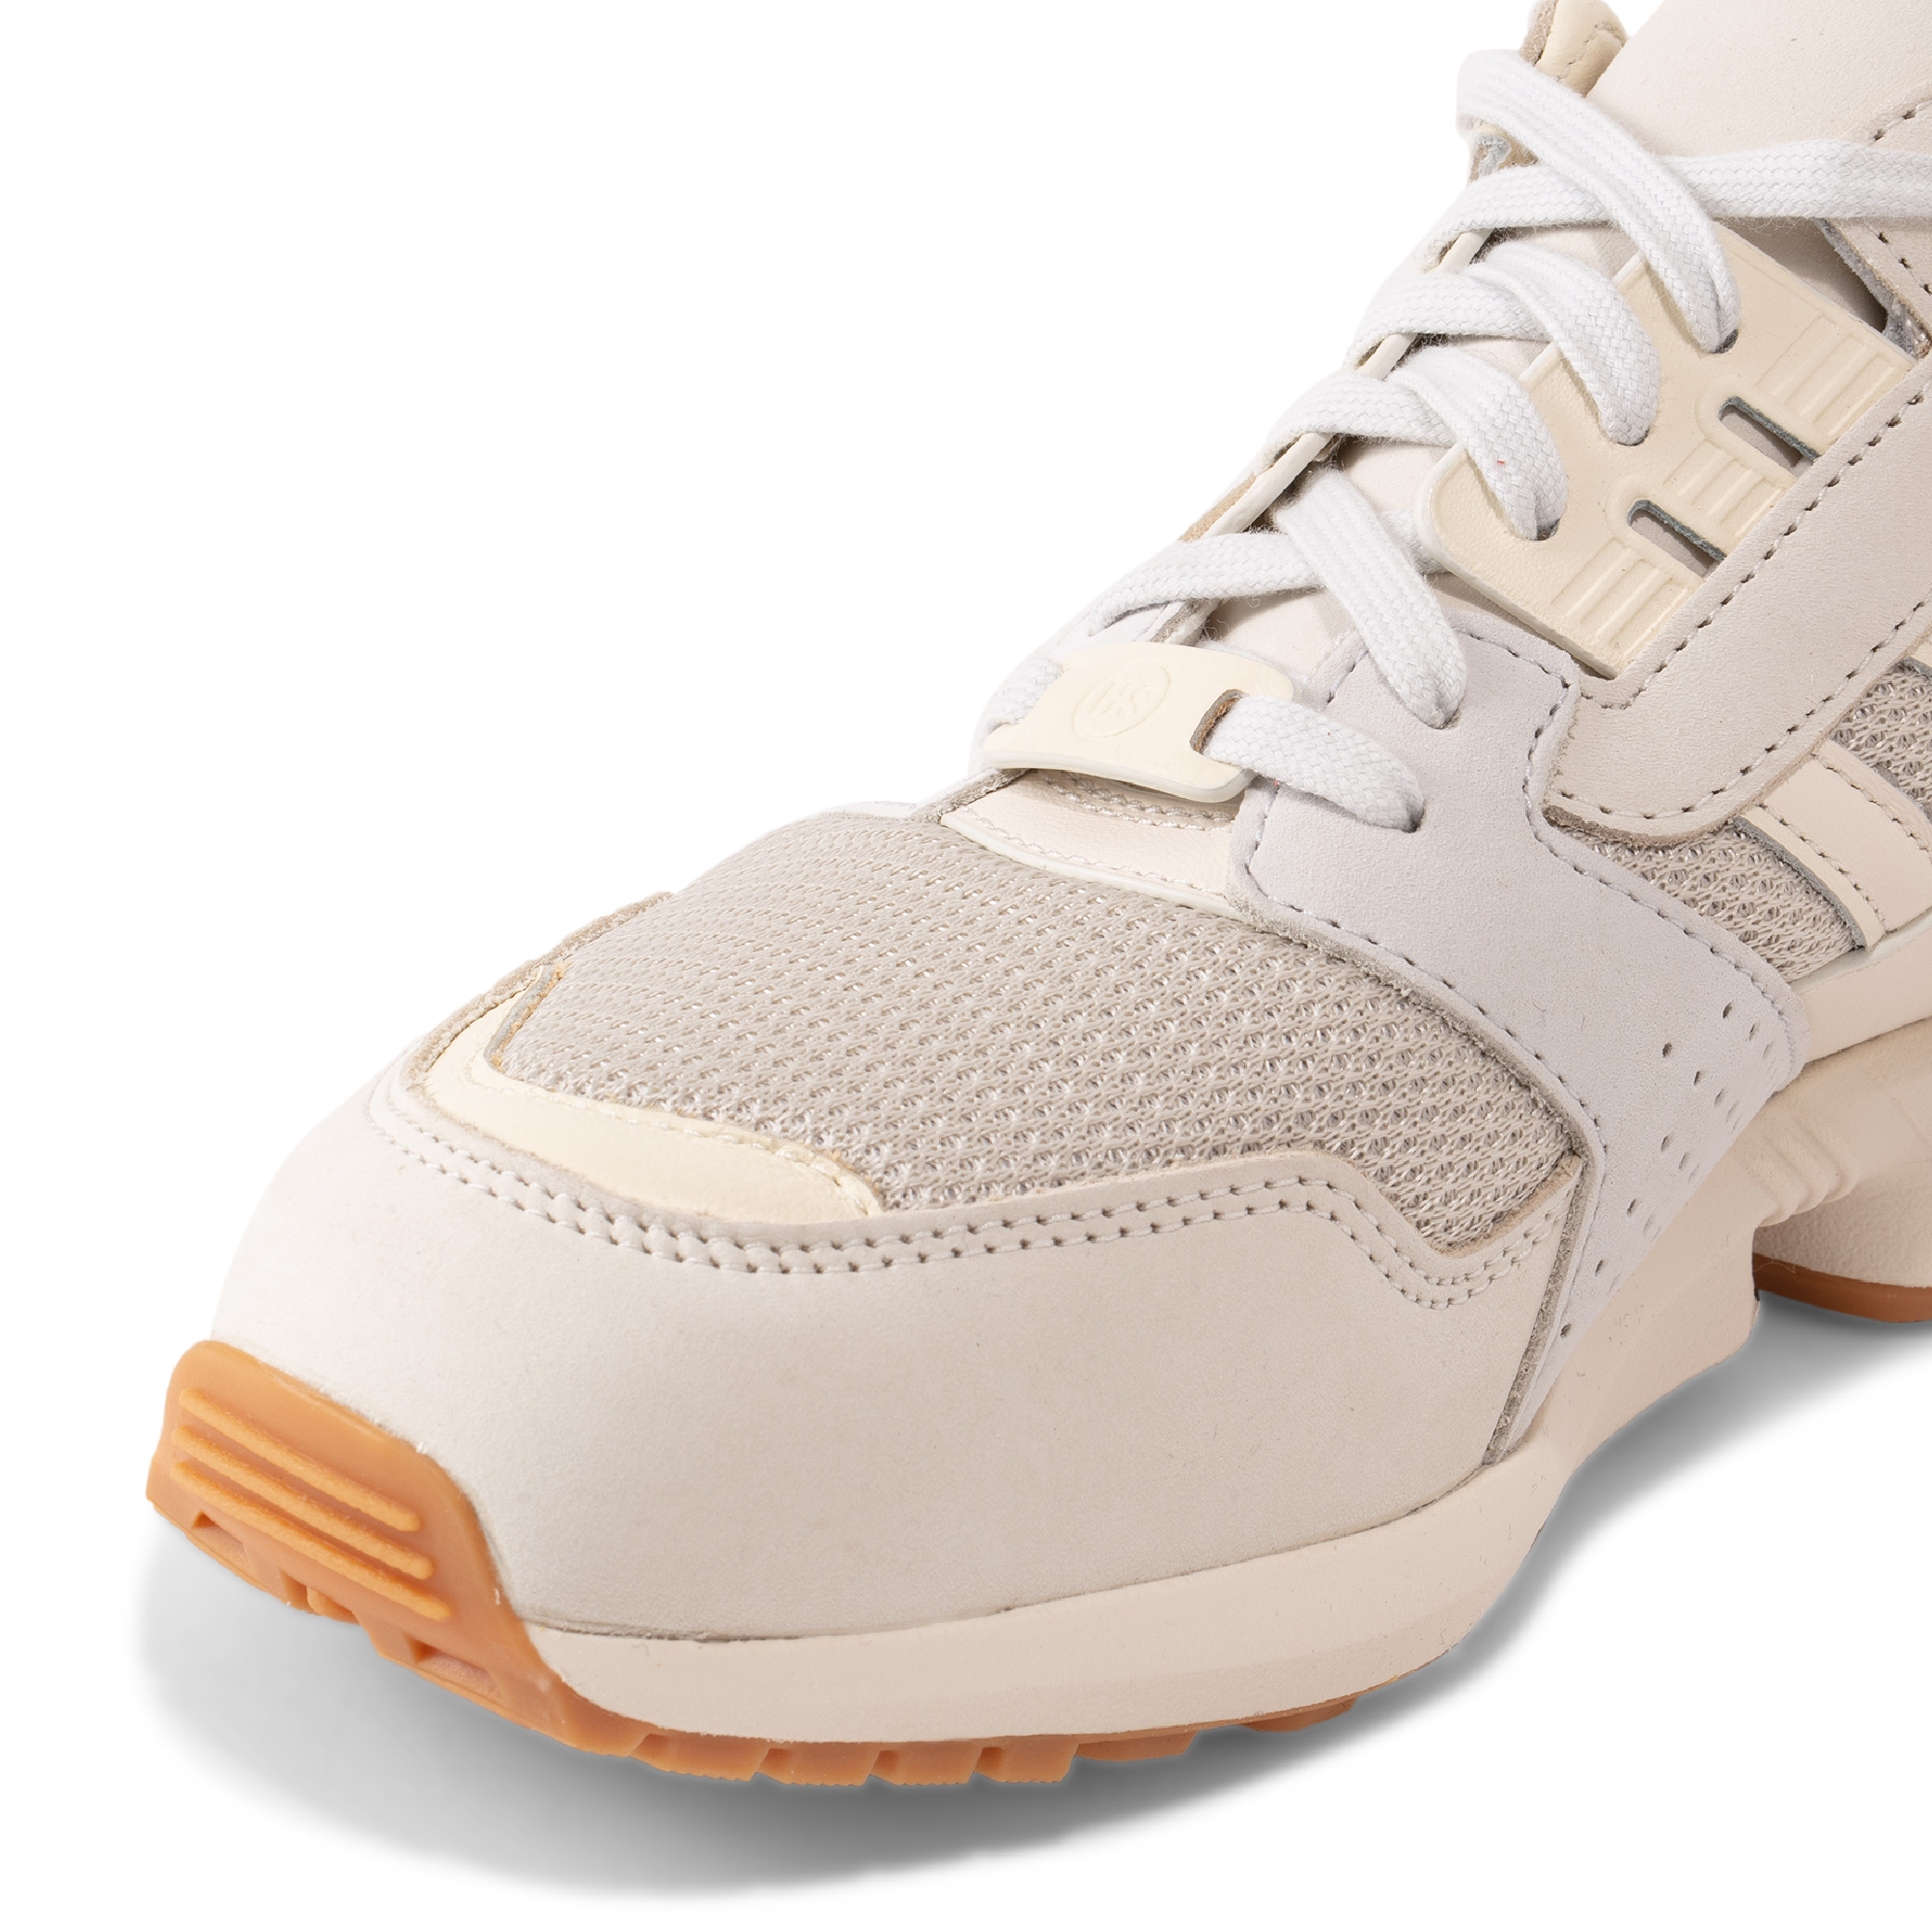 Adidas ZX 8000 sneakers for Men - White in UAE | Level Shoes